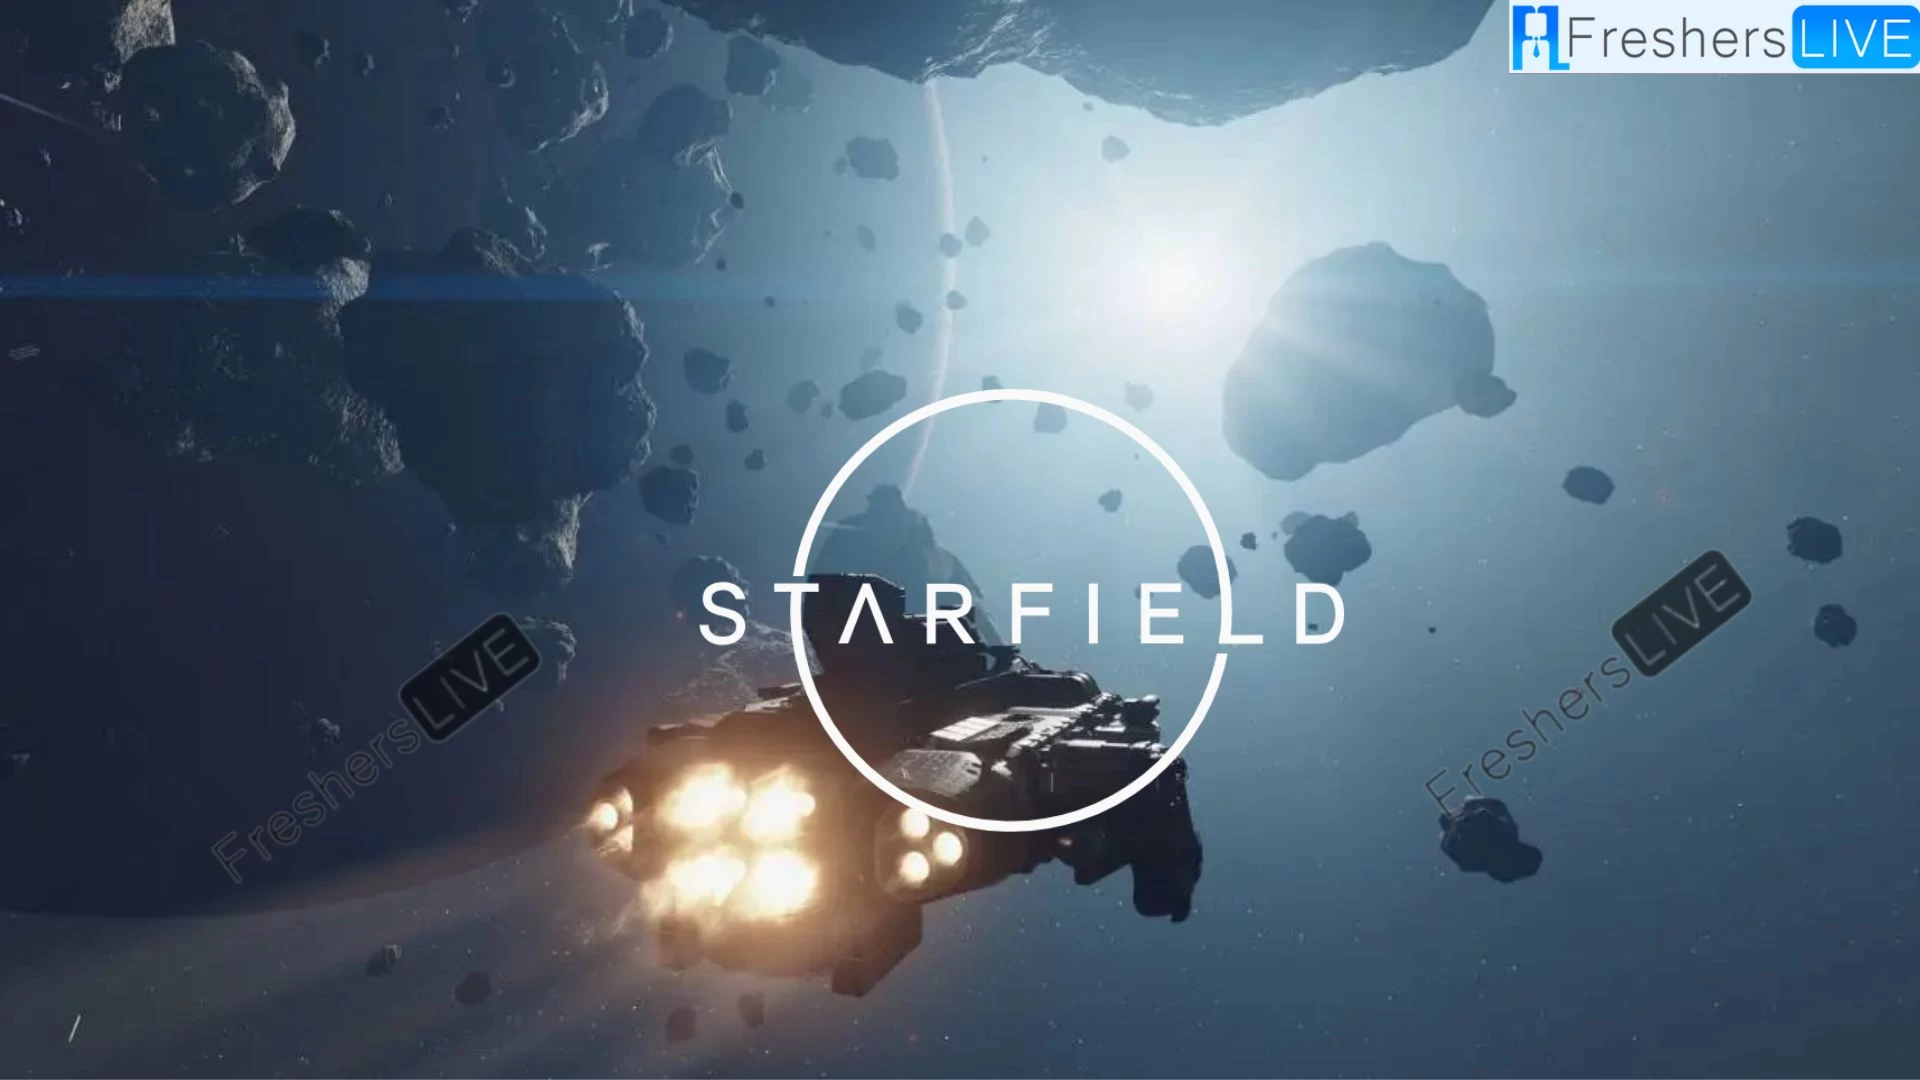 Starfield Texture Mods not Working, How to Fix starfield texture mods not Working?